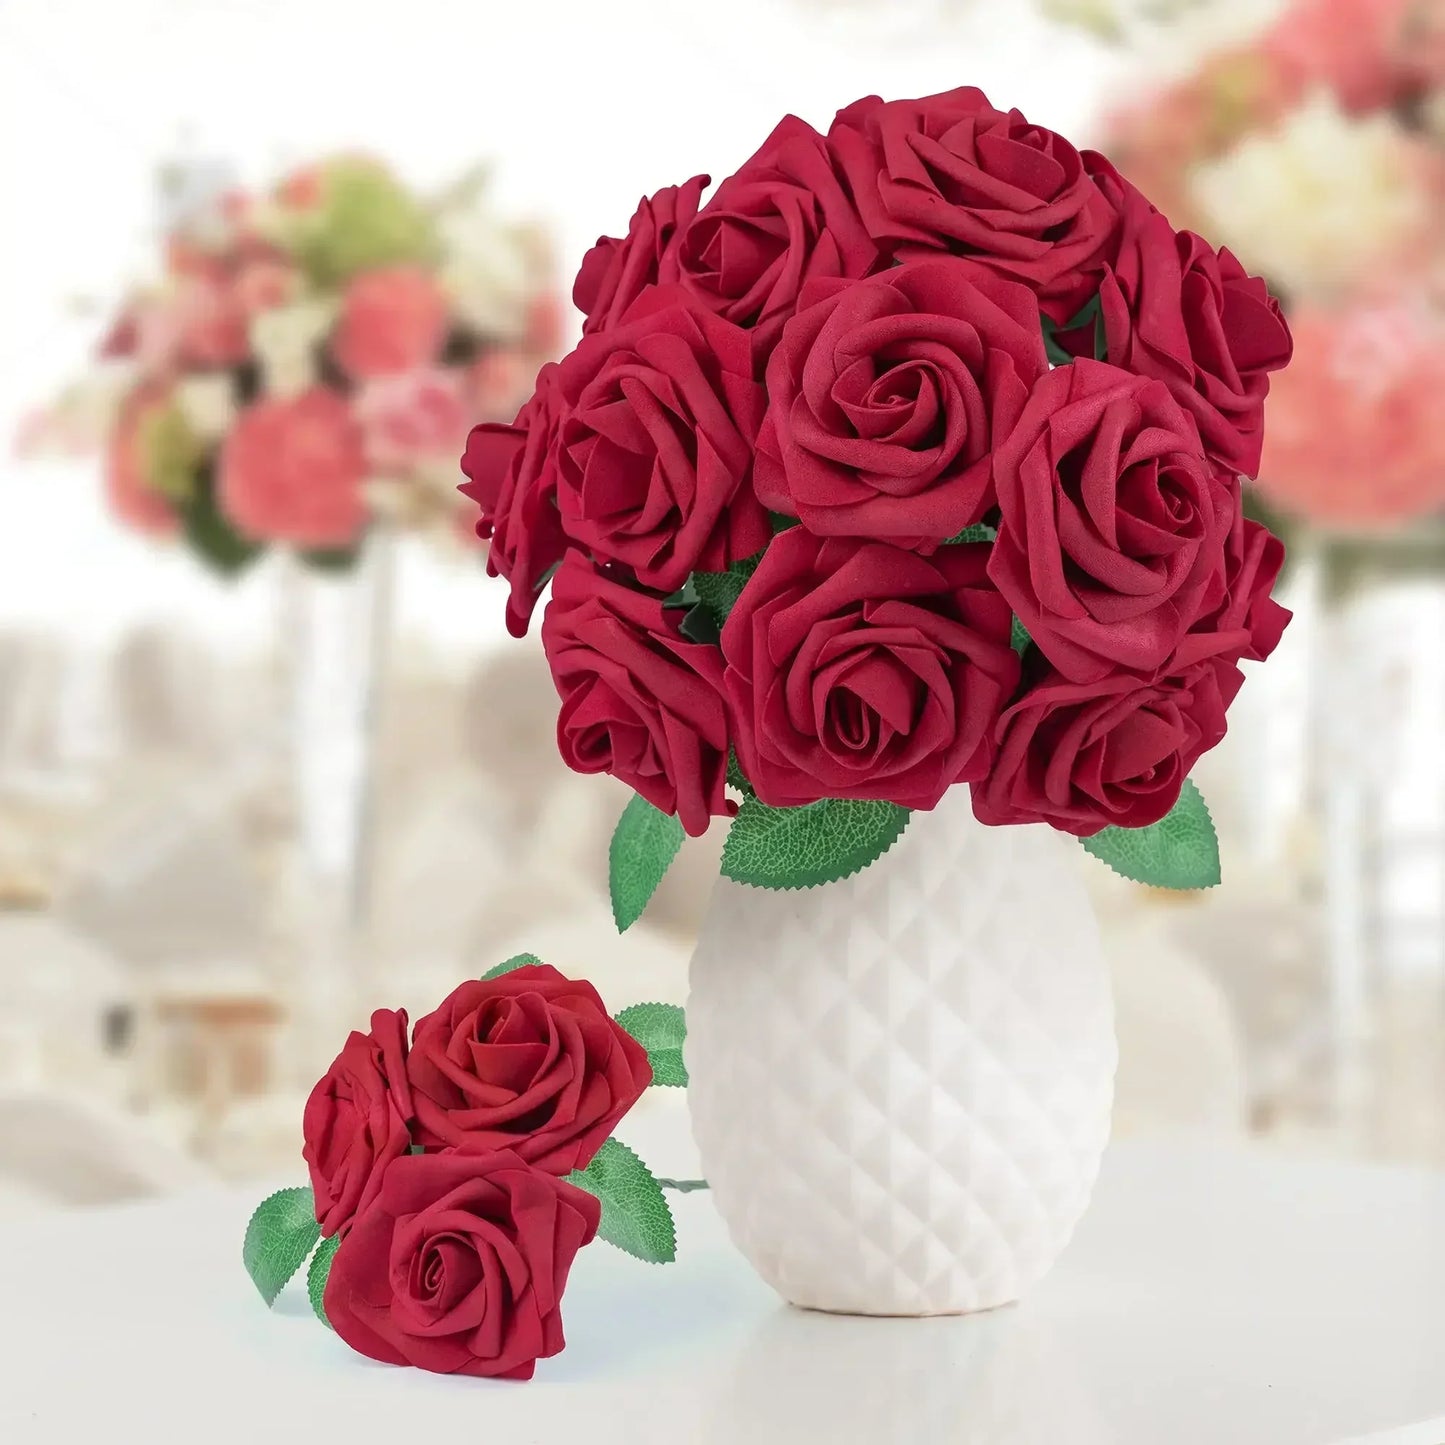 Rose Artificial Flowers 25pcs Foam Fake Roses Wedding Bouquets Centerpieces Mothers Day Valentines Gifts Party Decoration